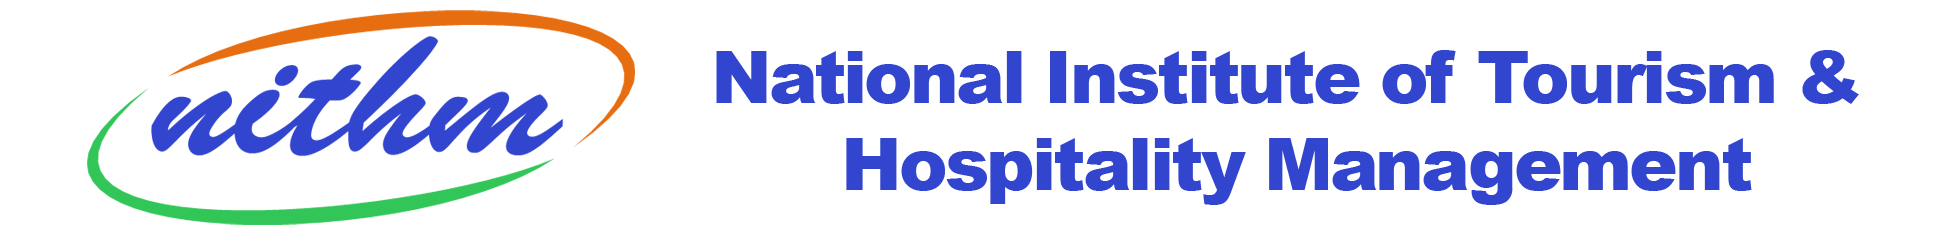 National Institute of Tourism and Hospitality Management Logo